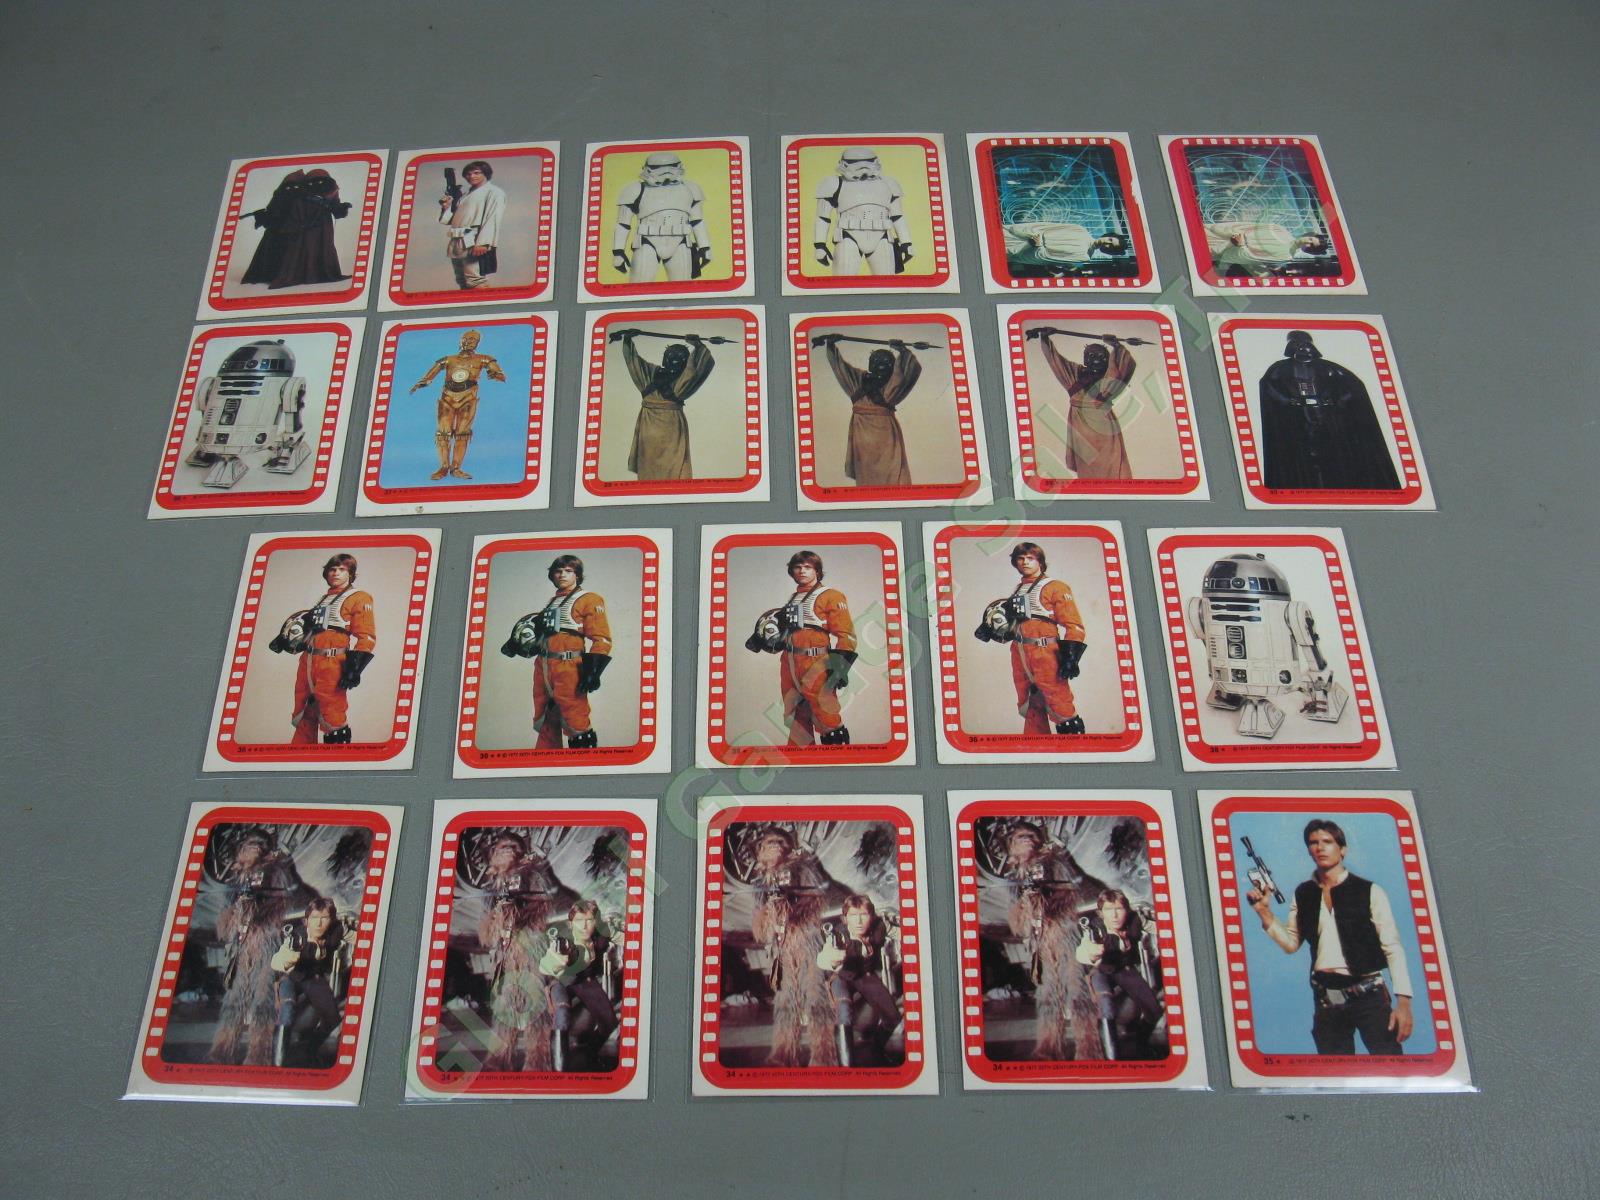 121 Topps Star Wars Sticker Cards Lot 1977 Series 1 2 3 4 5 Empire Strikes Back 4